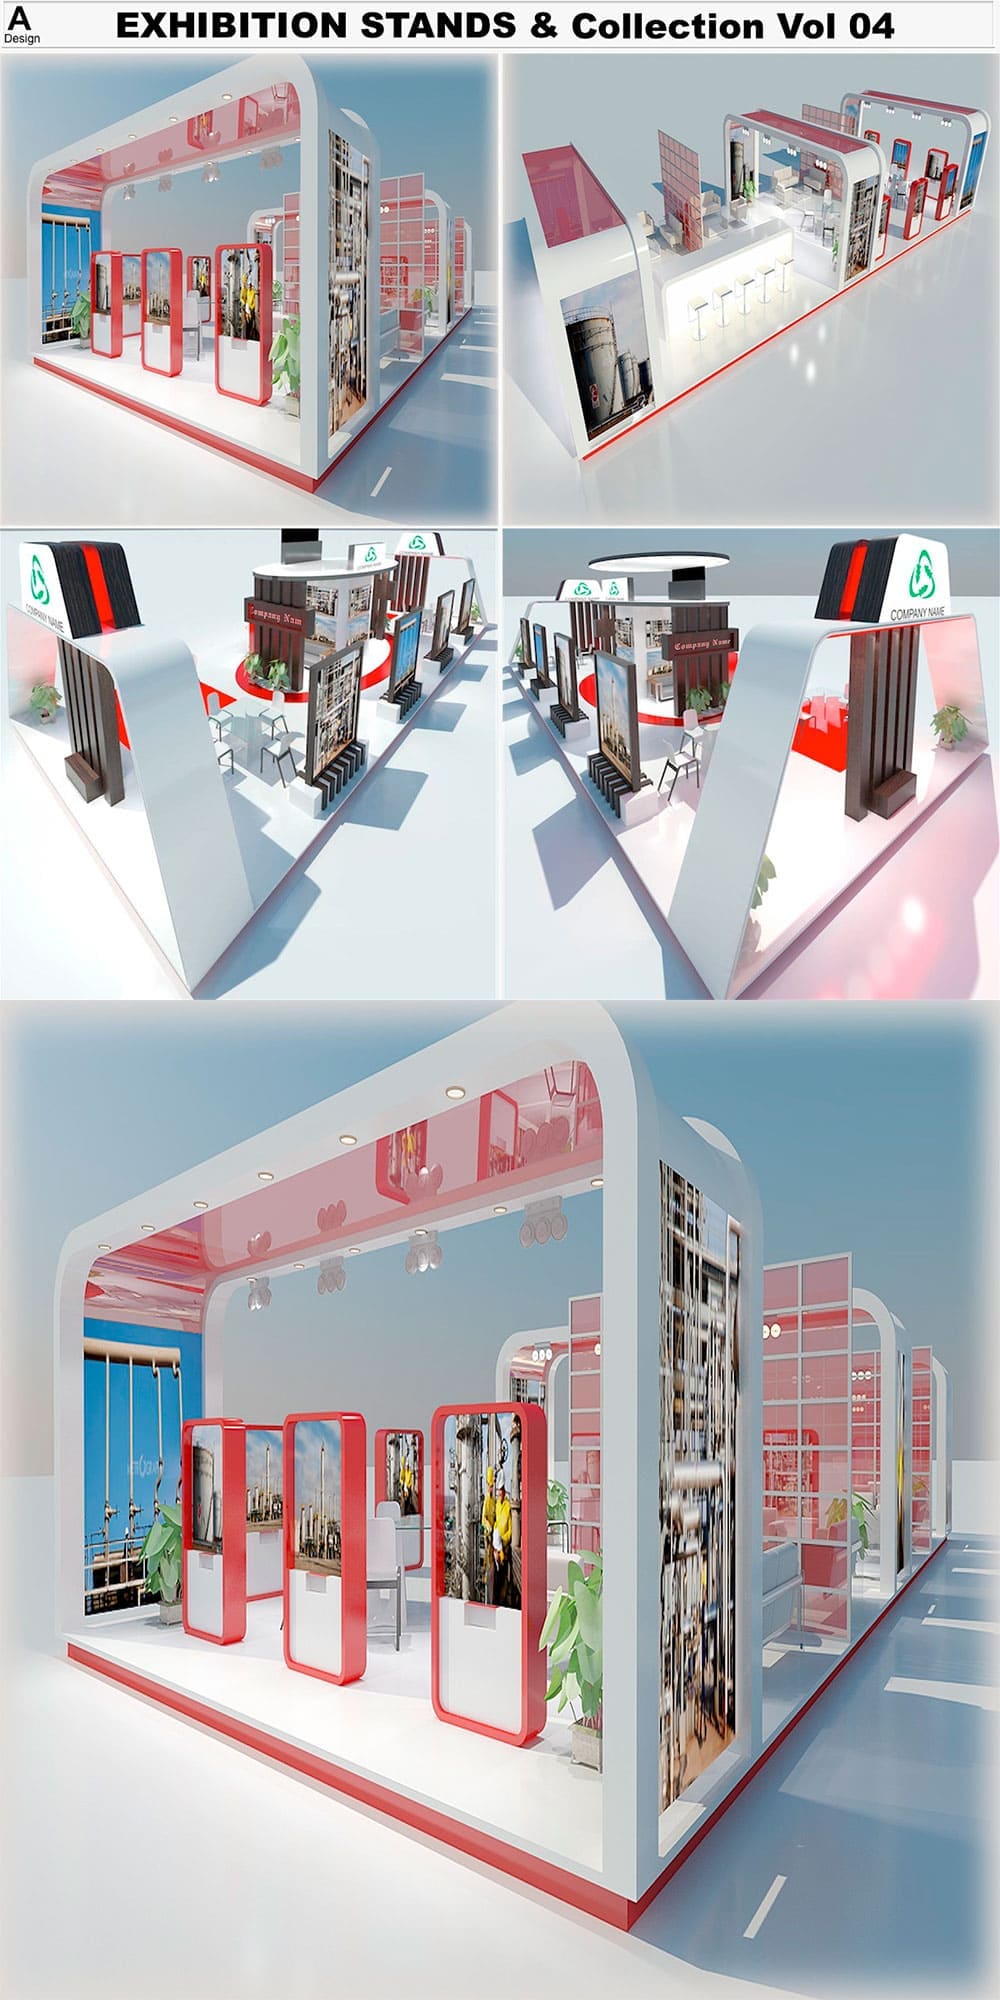 Exhibition stands collection 4, picture for pinterest.